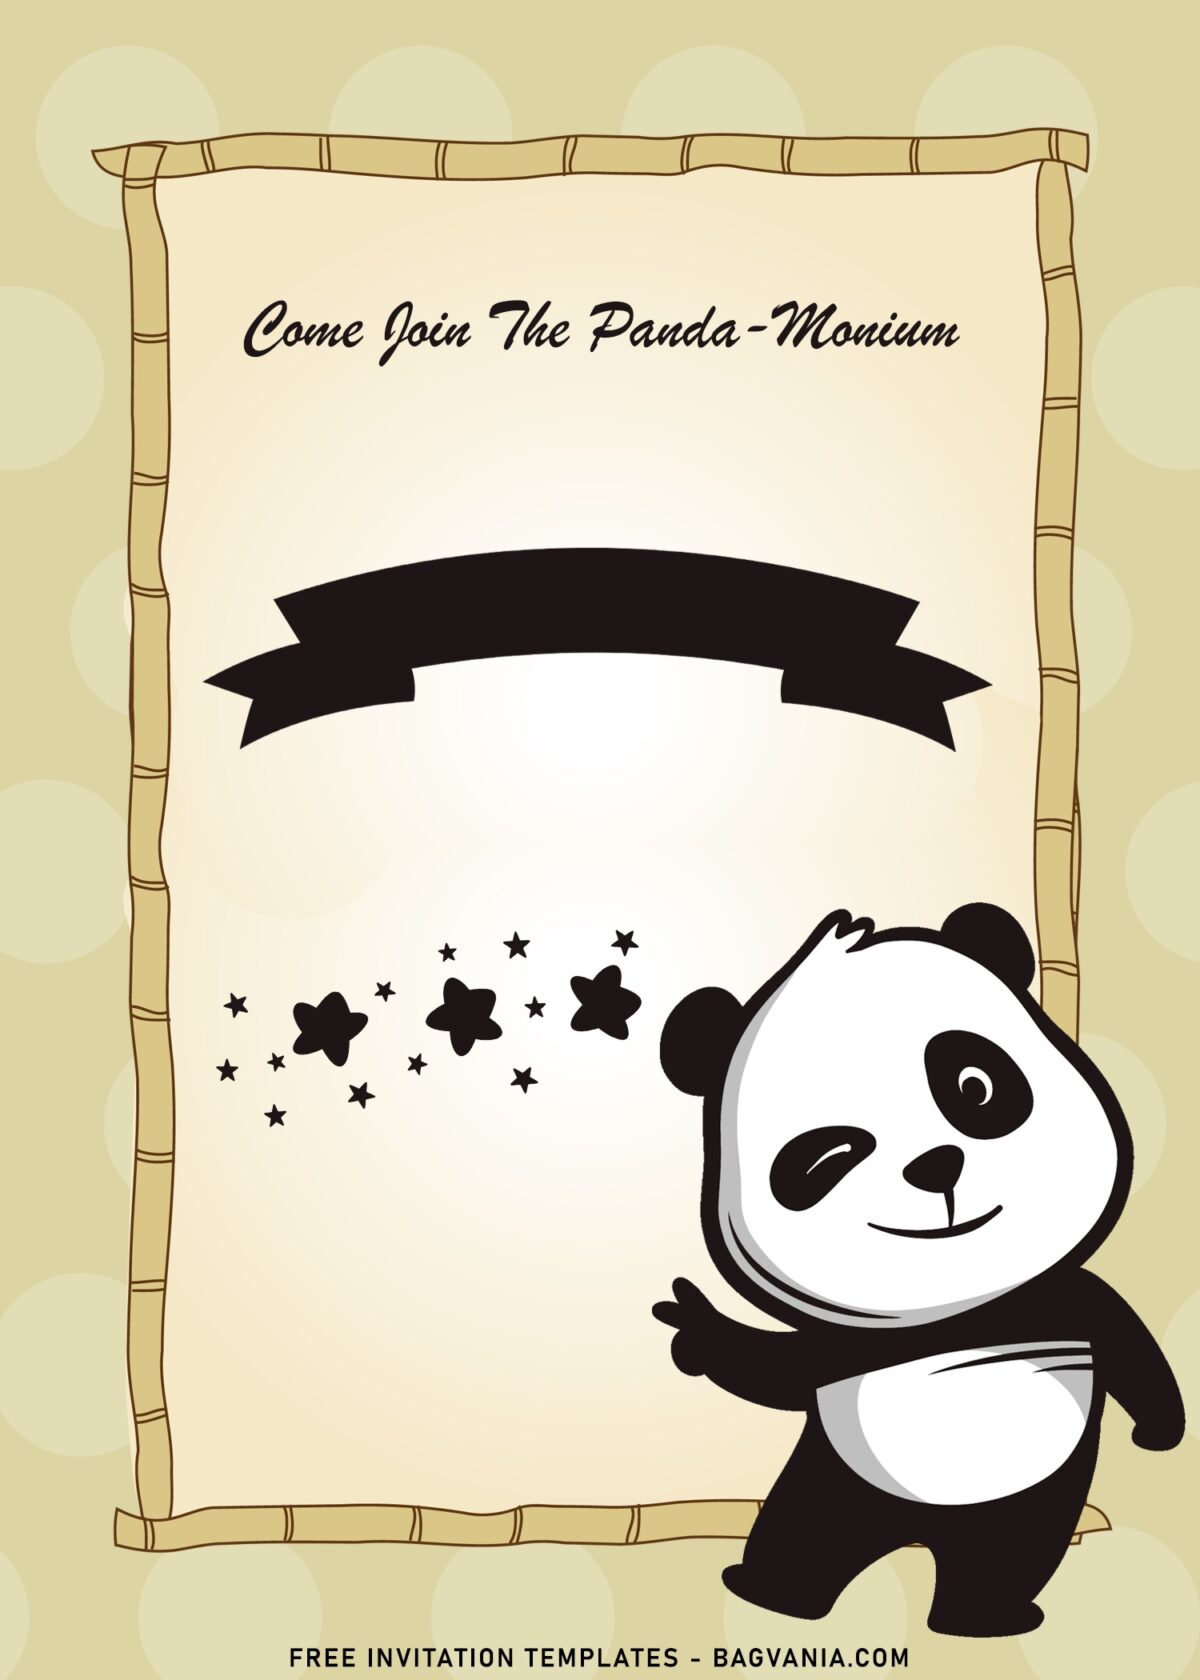 9+ Funny Panda Birthday Invitation Templates For Your Kid's Birthday with cute little panda pose